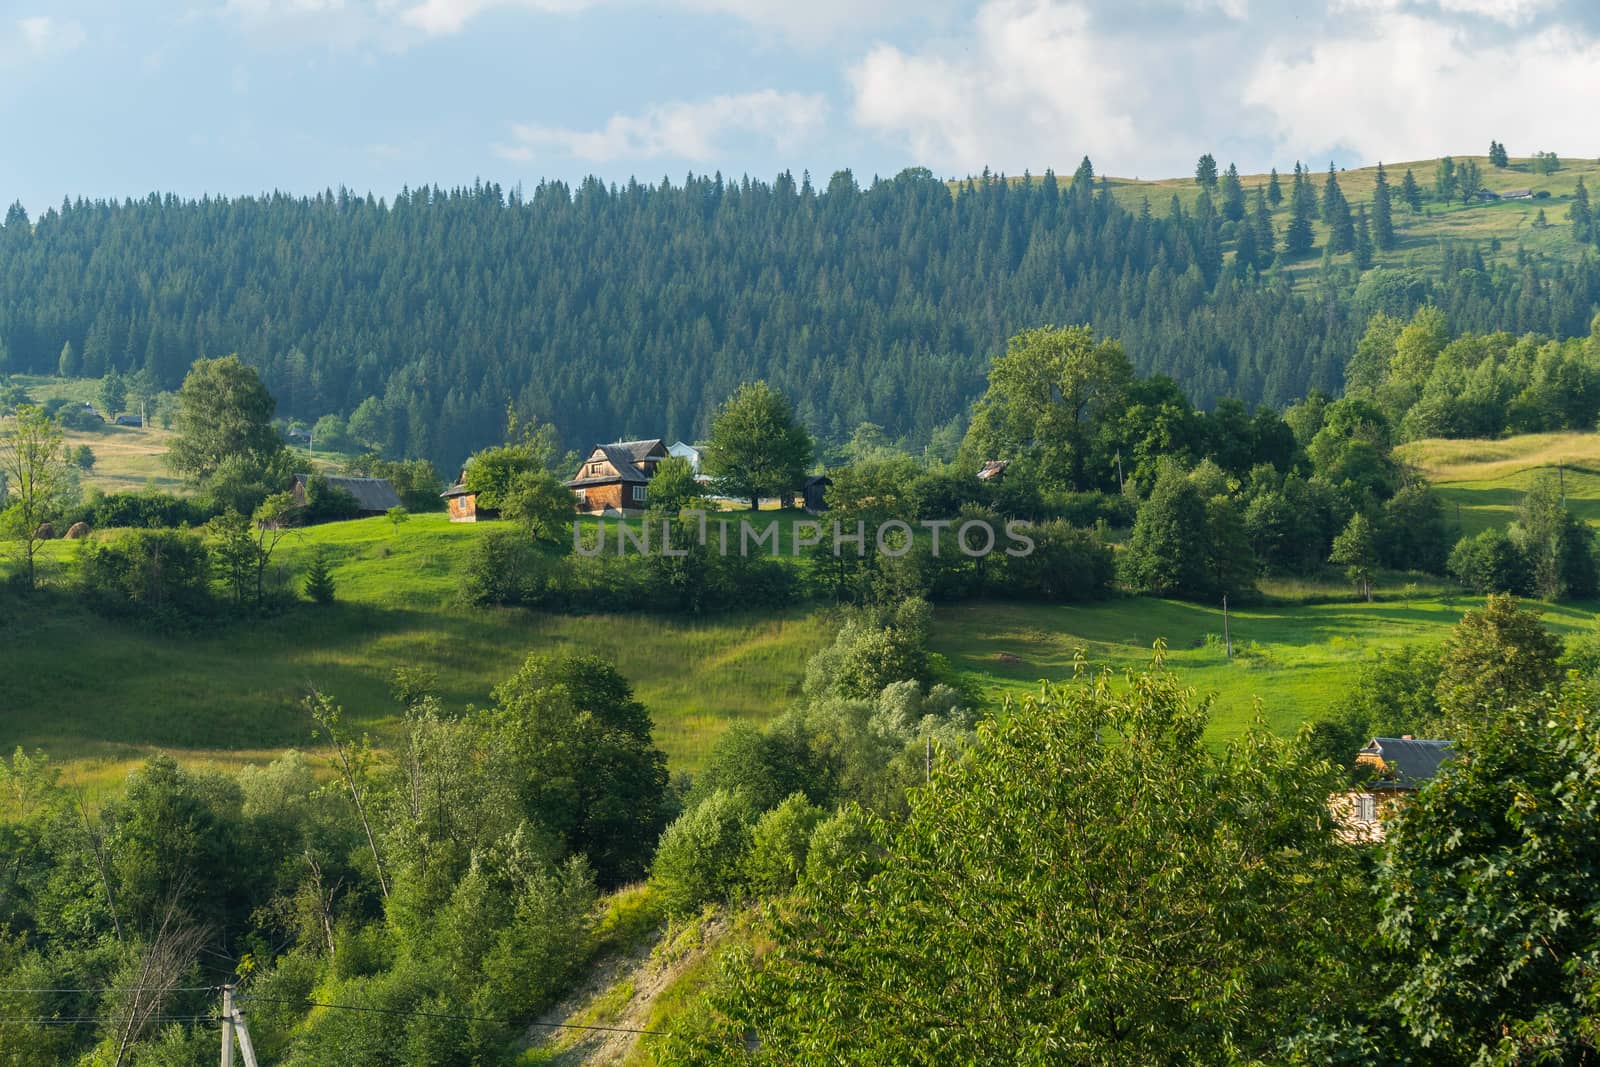 A small rural village with houses and yards against the background of a green coniferous forest